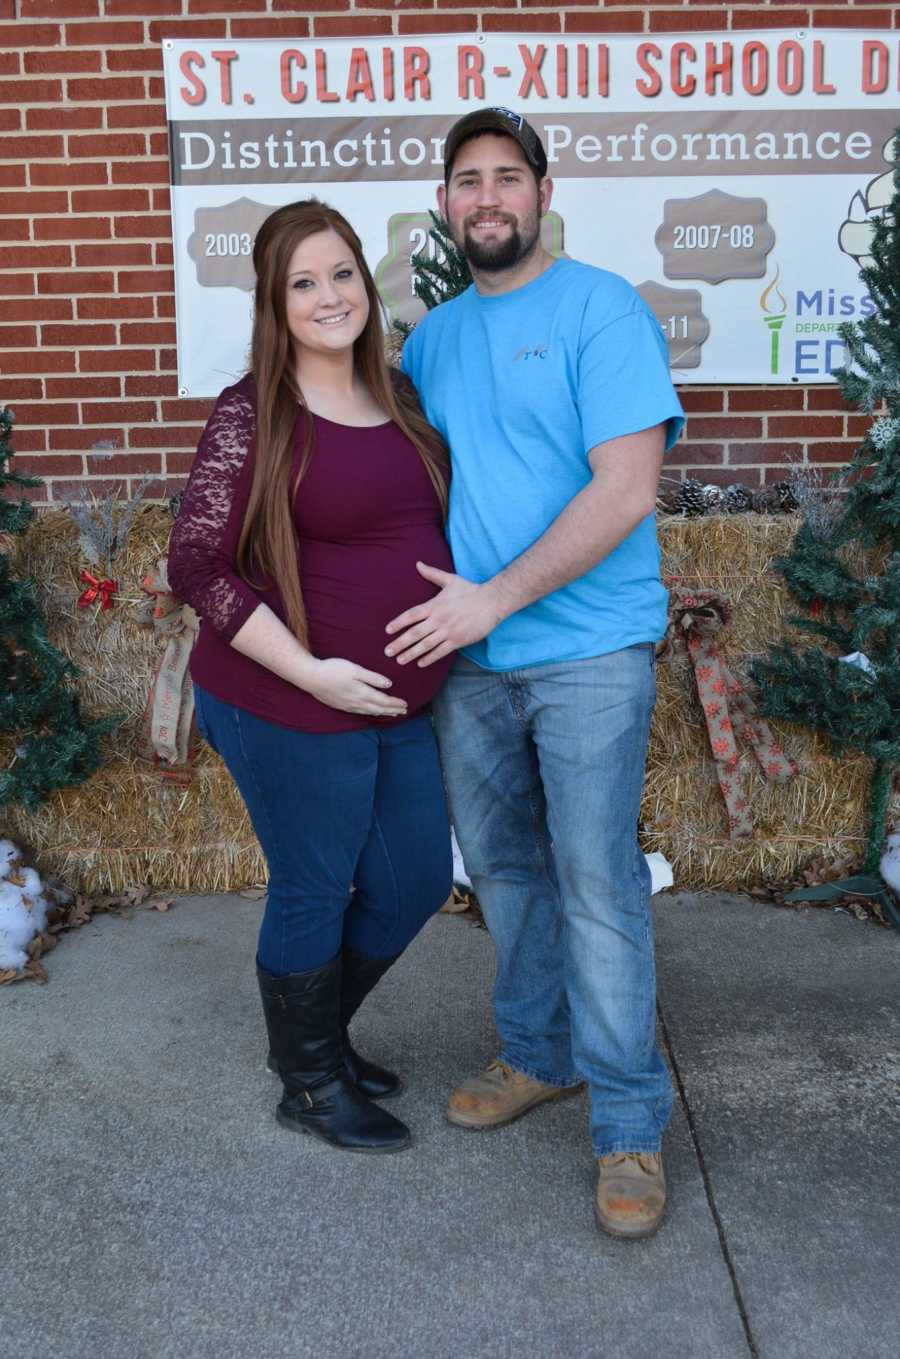 Pregnant woman and husband stand side by side smiling as they hold her stomach